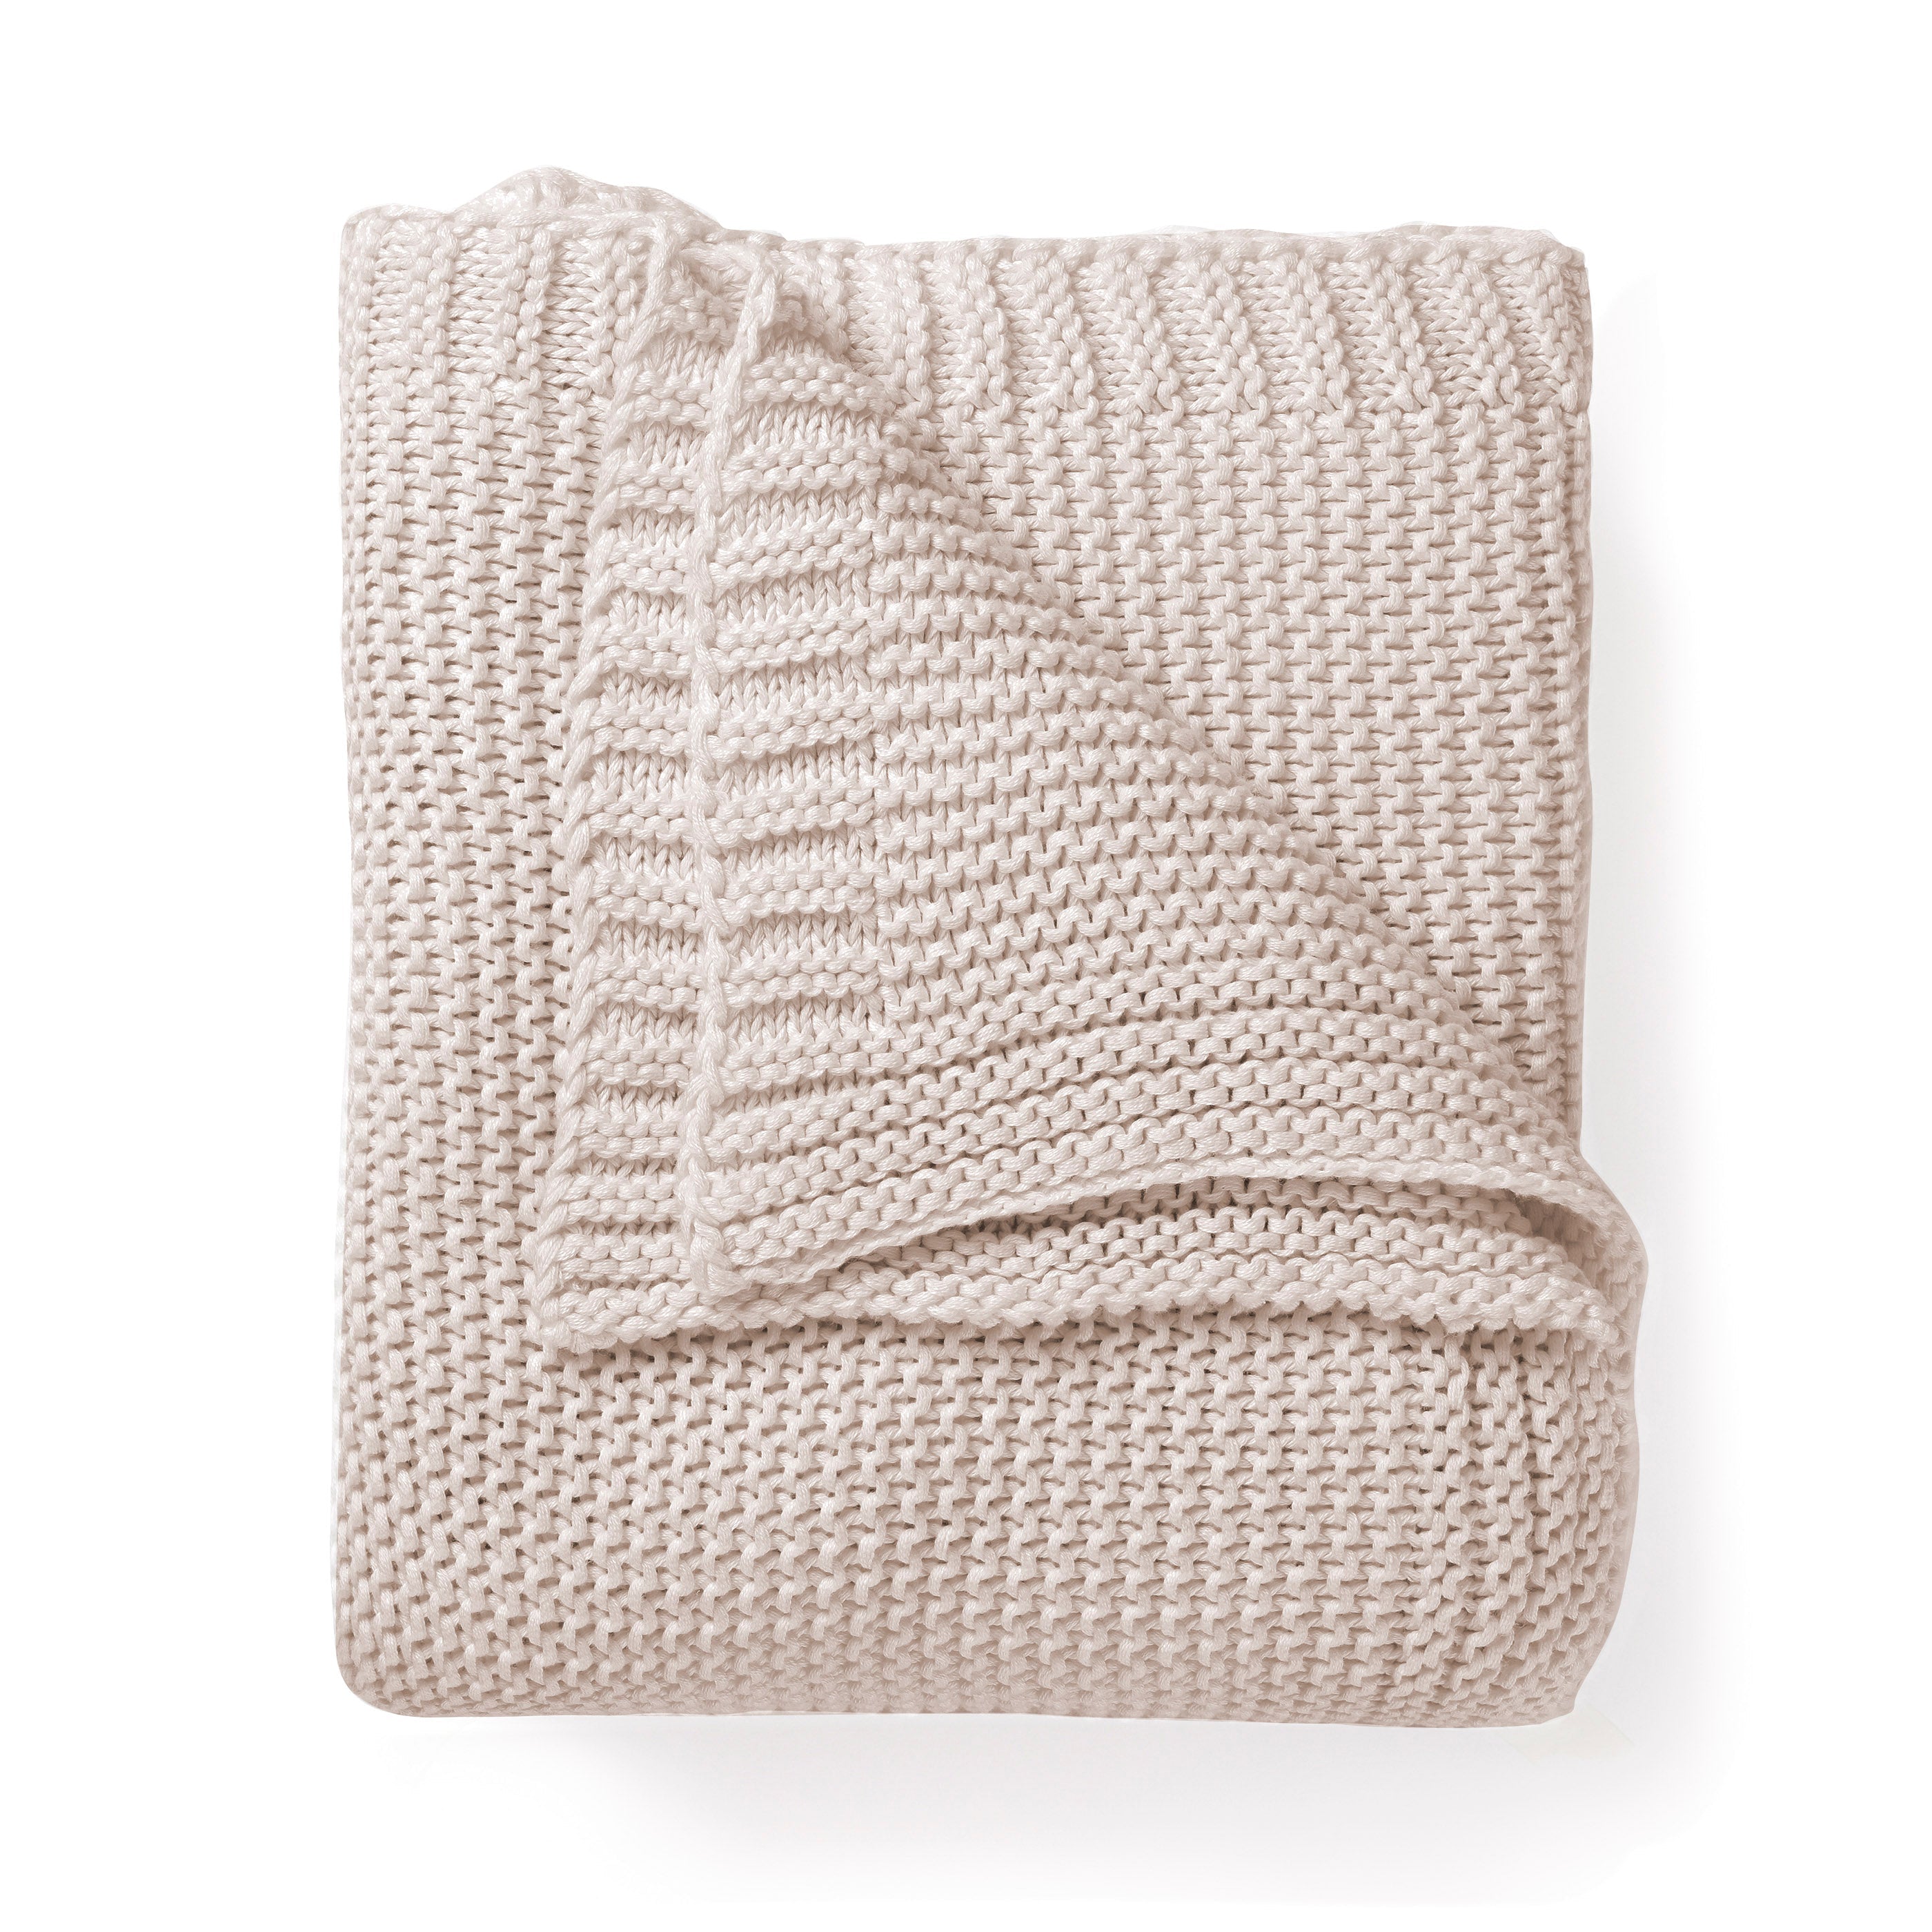 Chunky Knit Throw Blanket - Nora Shell